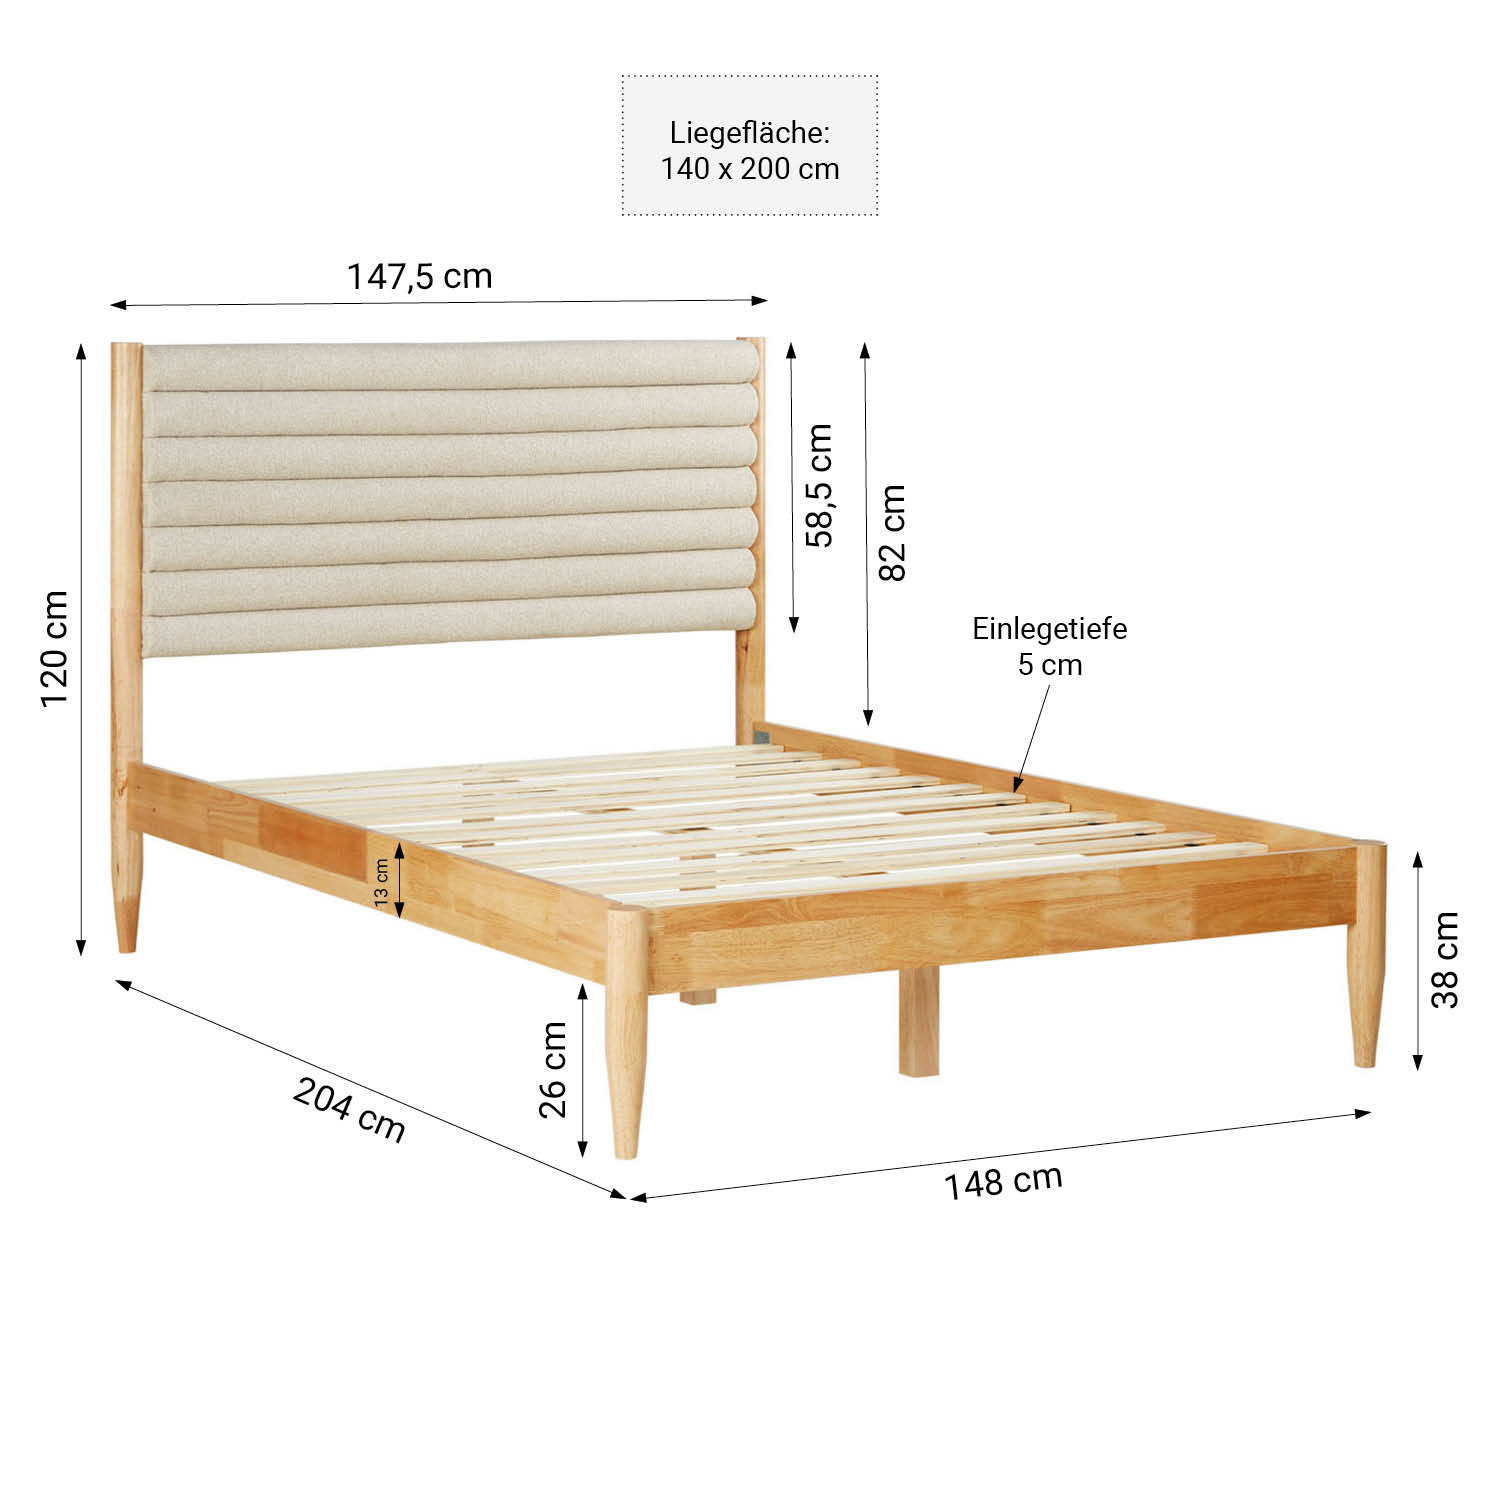 Small Double Bed 140x200 cm Wooden Bed Bouclé Beige Upholstered Bed with Slatted Frame Fabric Bed Frame